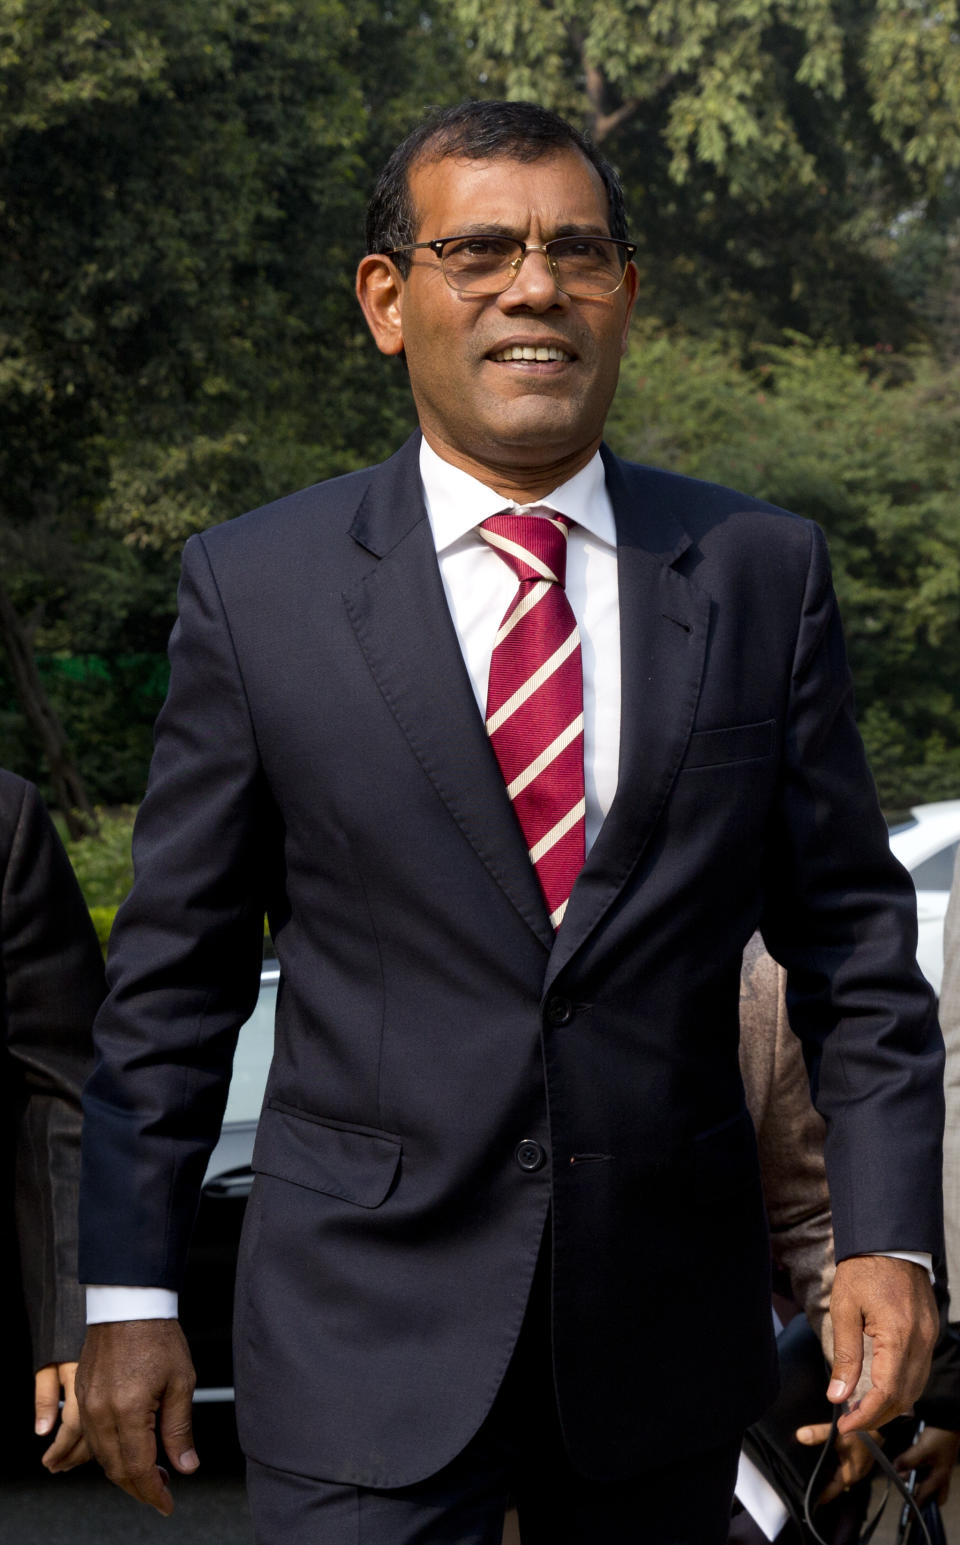 Former Maldives President Mohamed Nasheed arrives to deliver a lecture on climate change in New Delhi, India, Thursday, Feb. 14, 2019. In an interview to The Associated Press Thursday after giving a climate change lecture, Nasheed said the Indian Ocean archipelago nation is seeking tenders for renewable energy projects to help lessen the burden of foreign debt. (AP Photo/Manish Swarup)